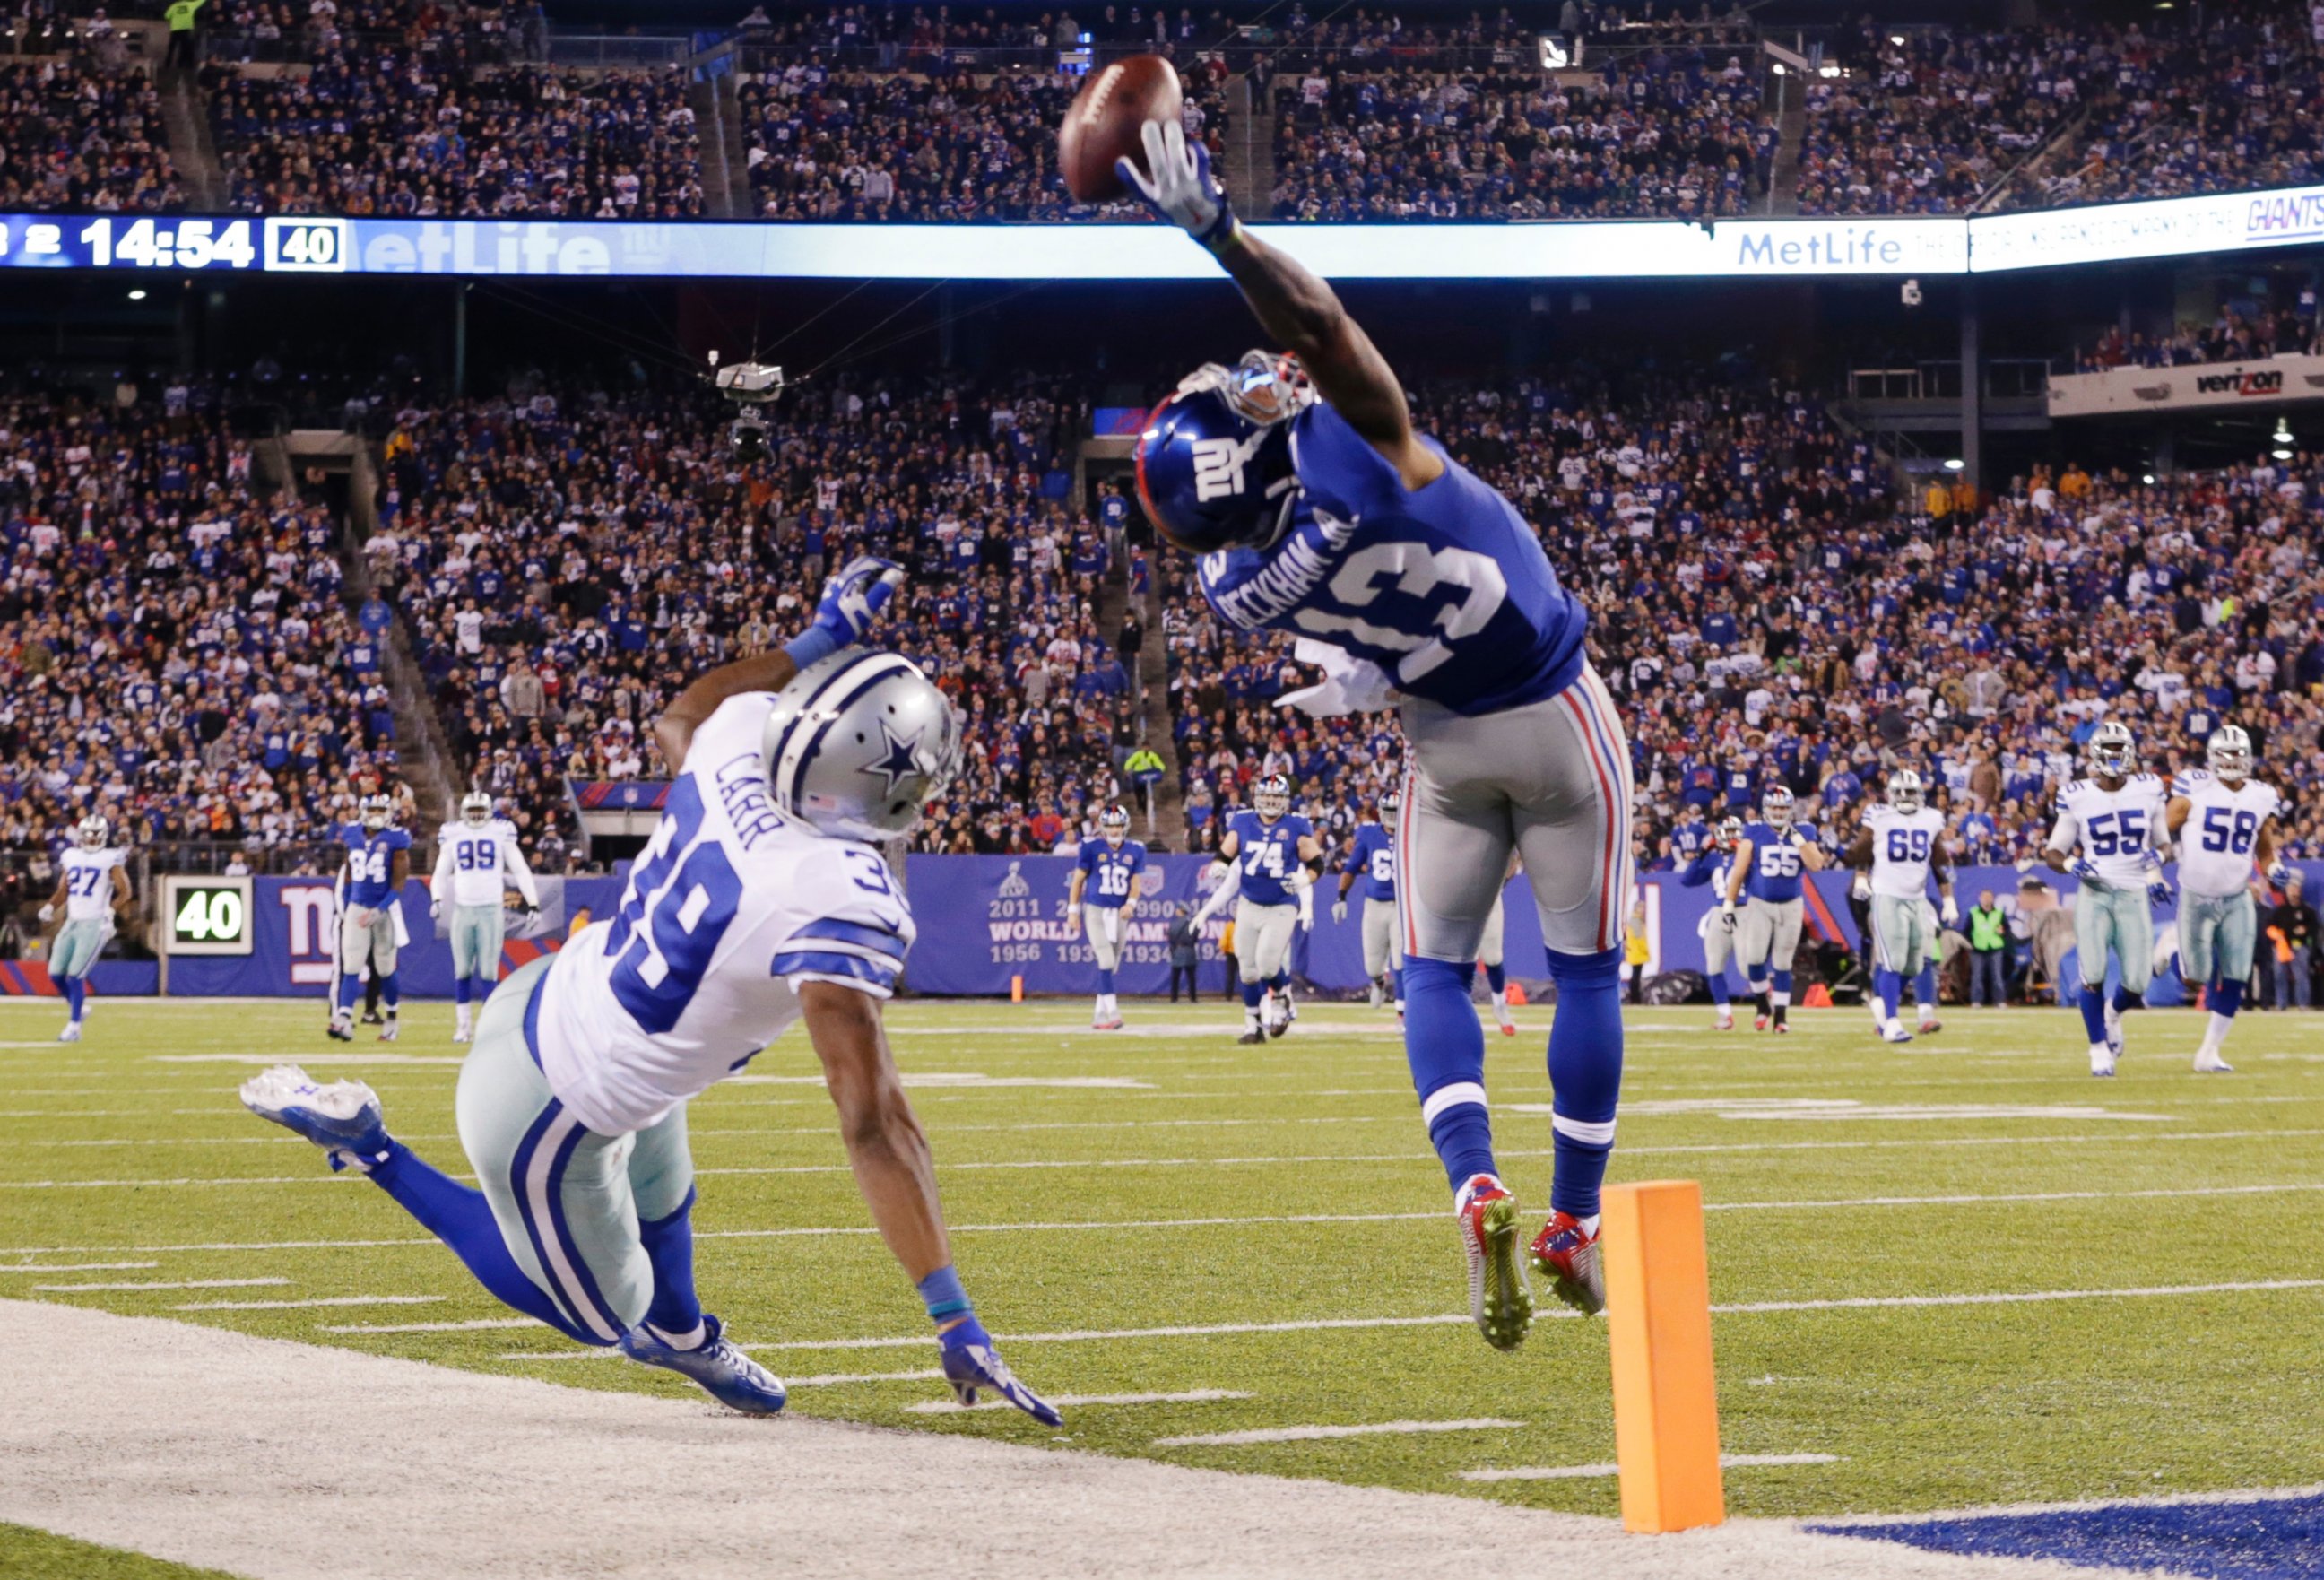 PHOTO: New York Giants wide receiver Odell Beckham Jr. makes a one-handed catch for a touchdown against Dallas Cowboys cornerback Brandon Carr in the second quarter of an NFL football game, Nov. 23, 2014, in East Rutherford, N.J.